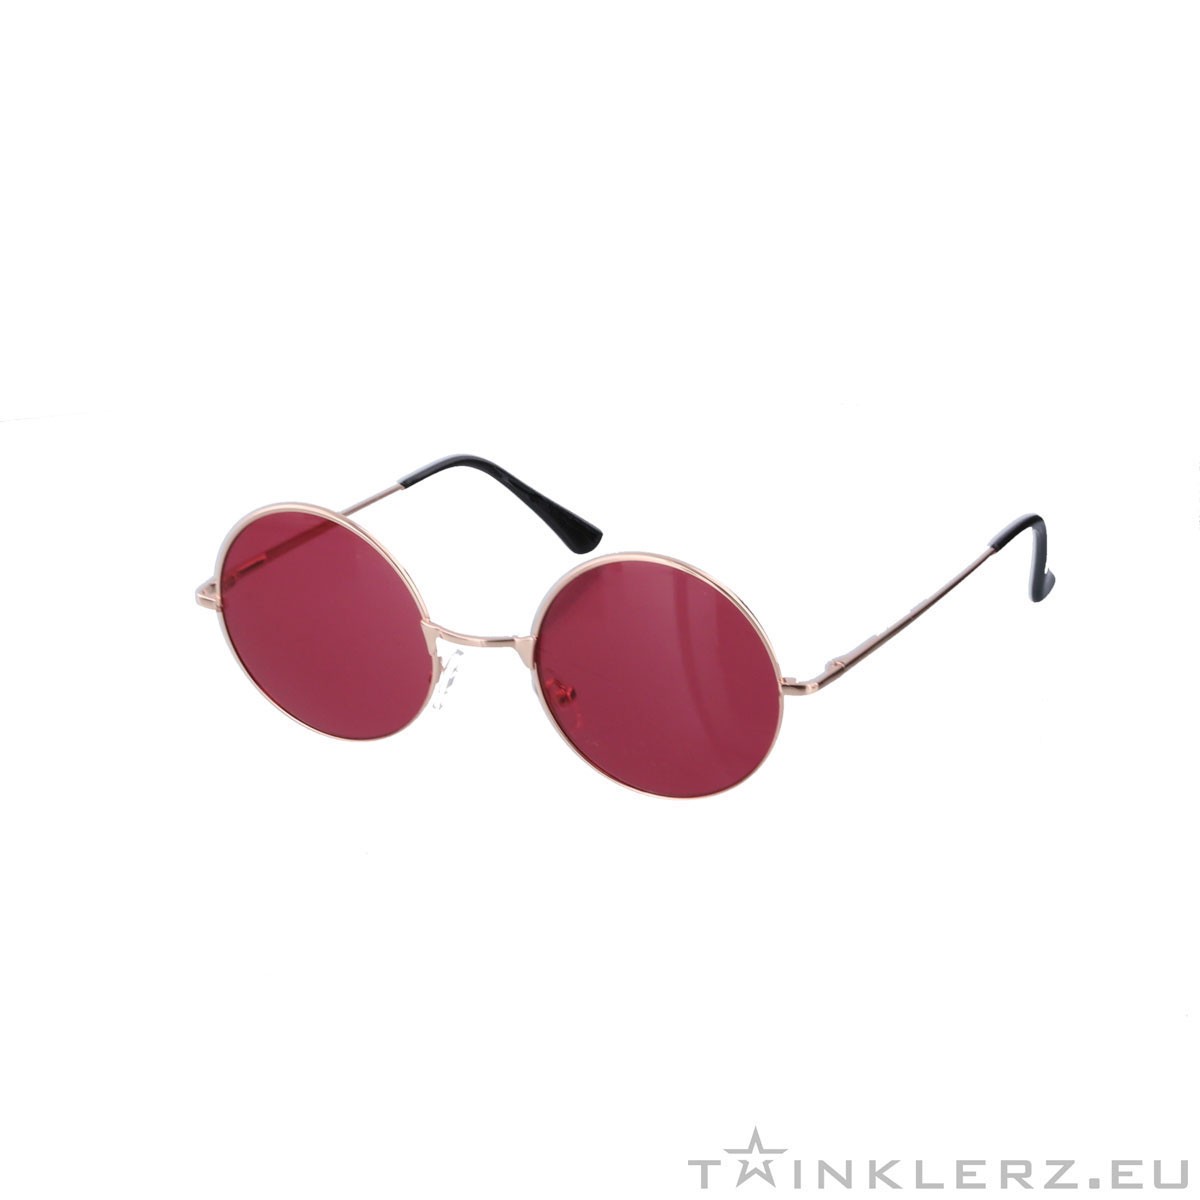 Small round golden sunglasses - red colored glasses 